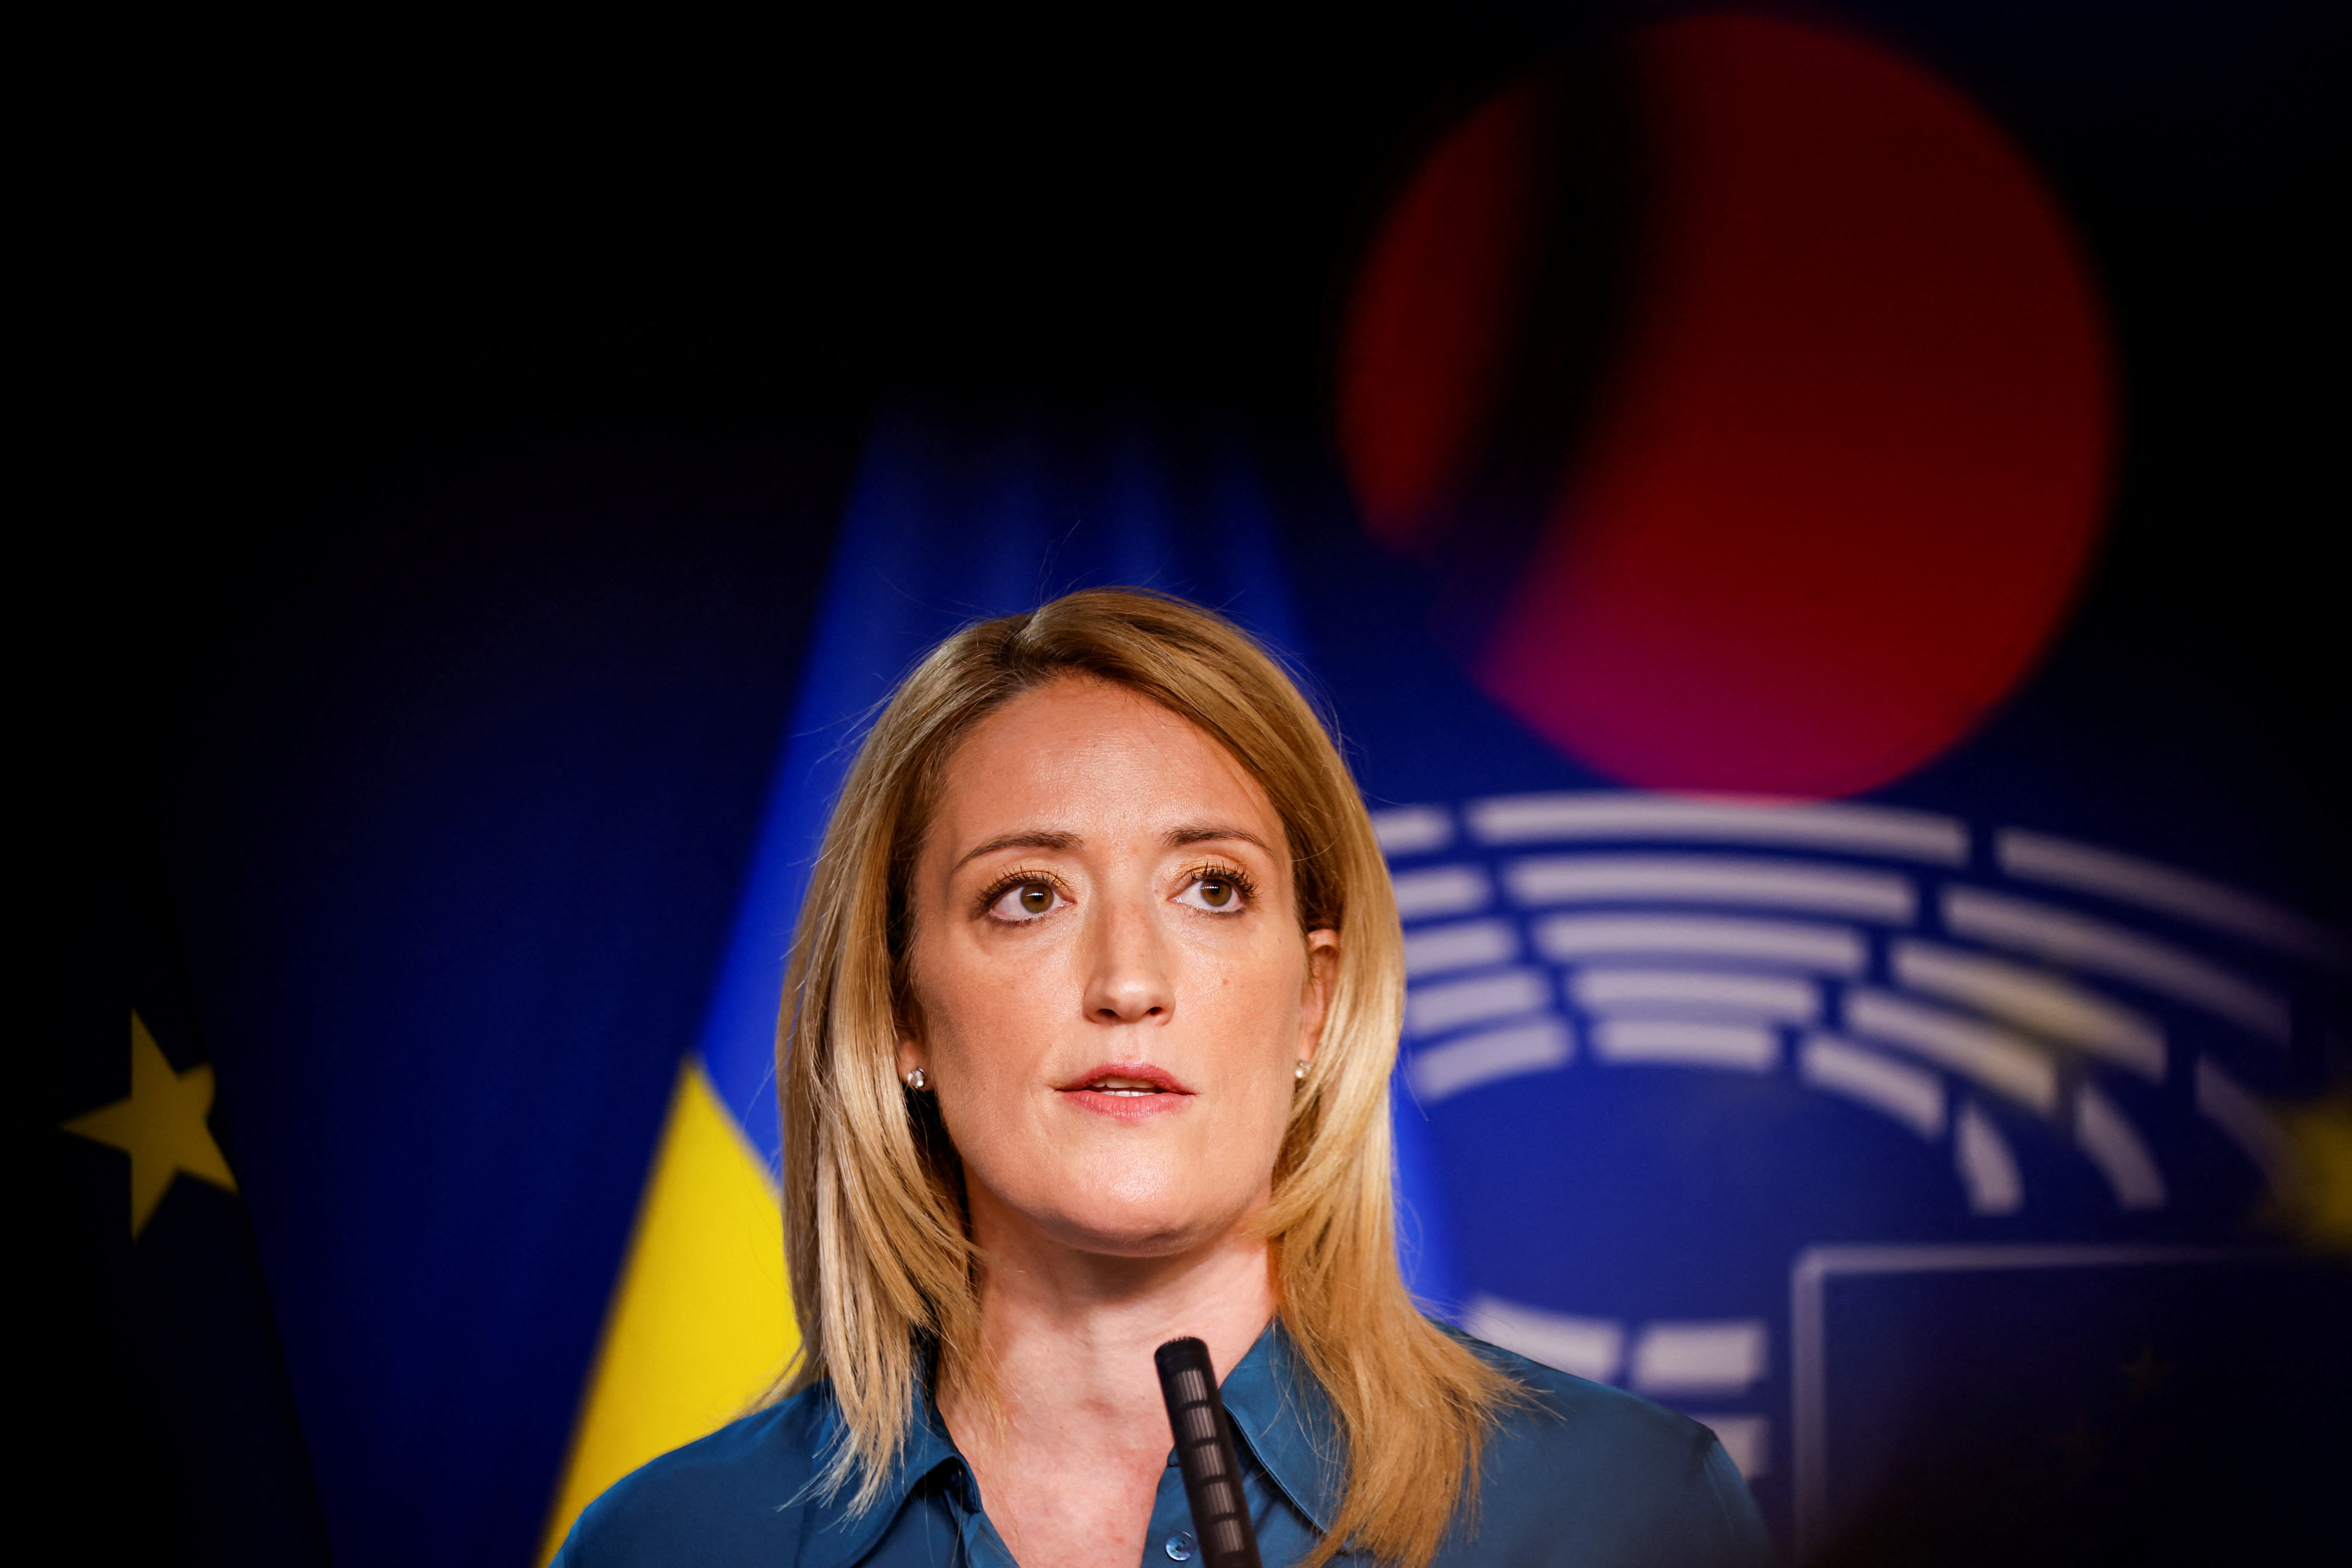 European Parliament President Roberta Mezzola during a press conference at the European Parliament in Brussels, Belgium, April 28, 2022. REUTERS/Joanna Giron